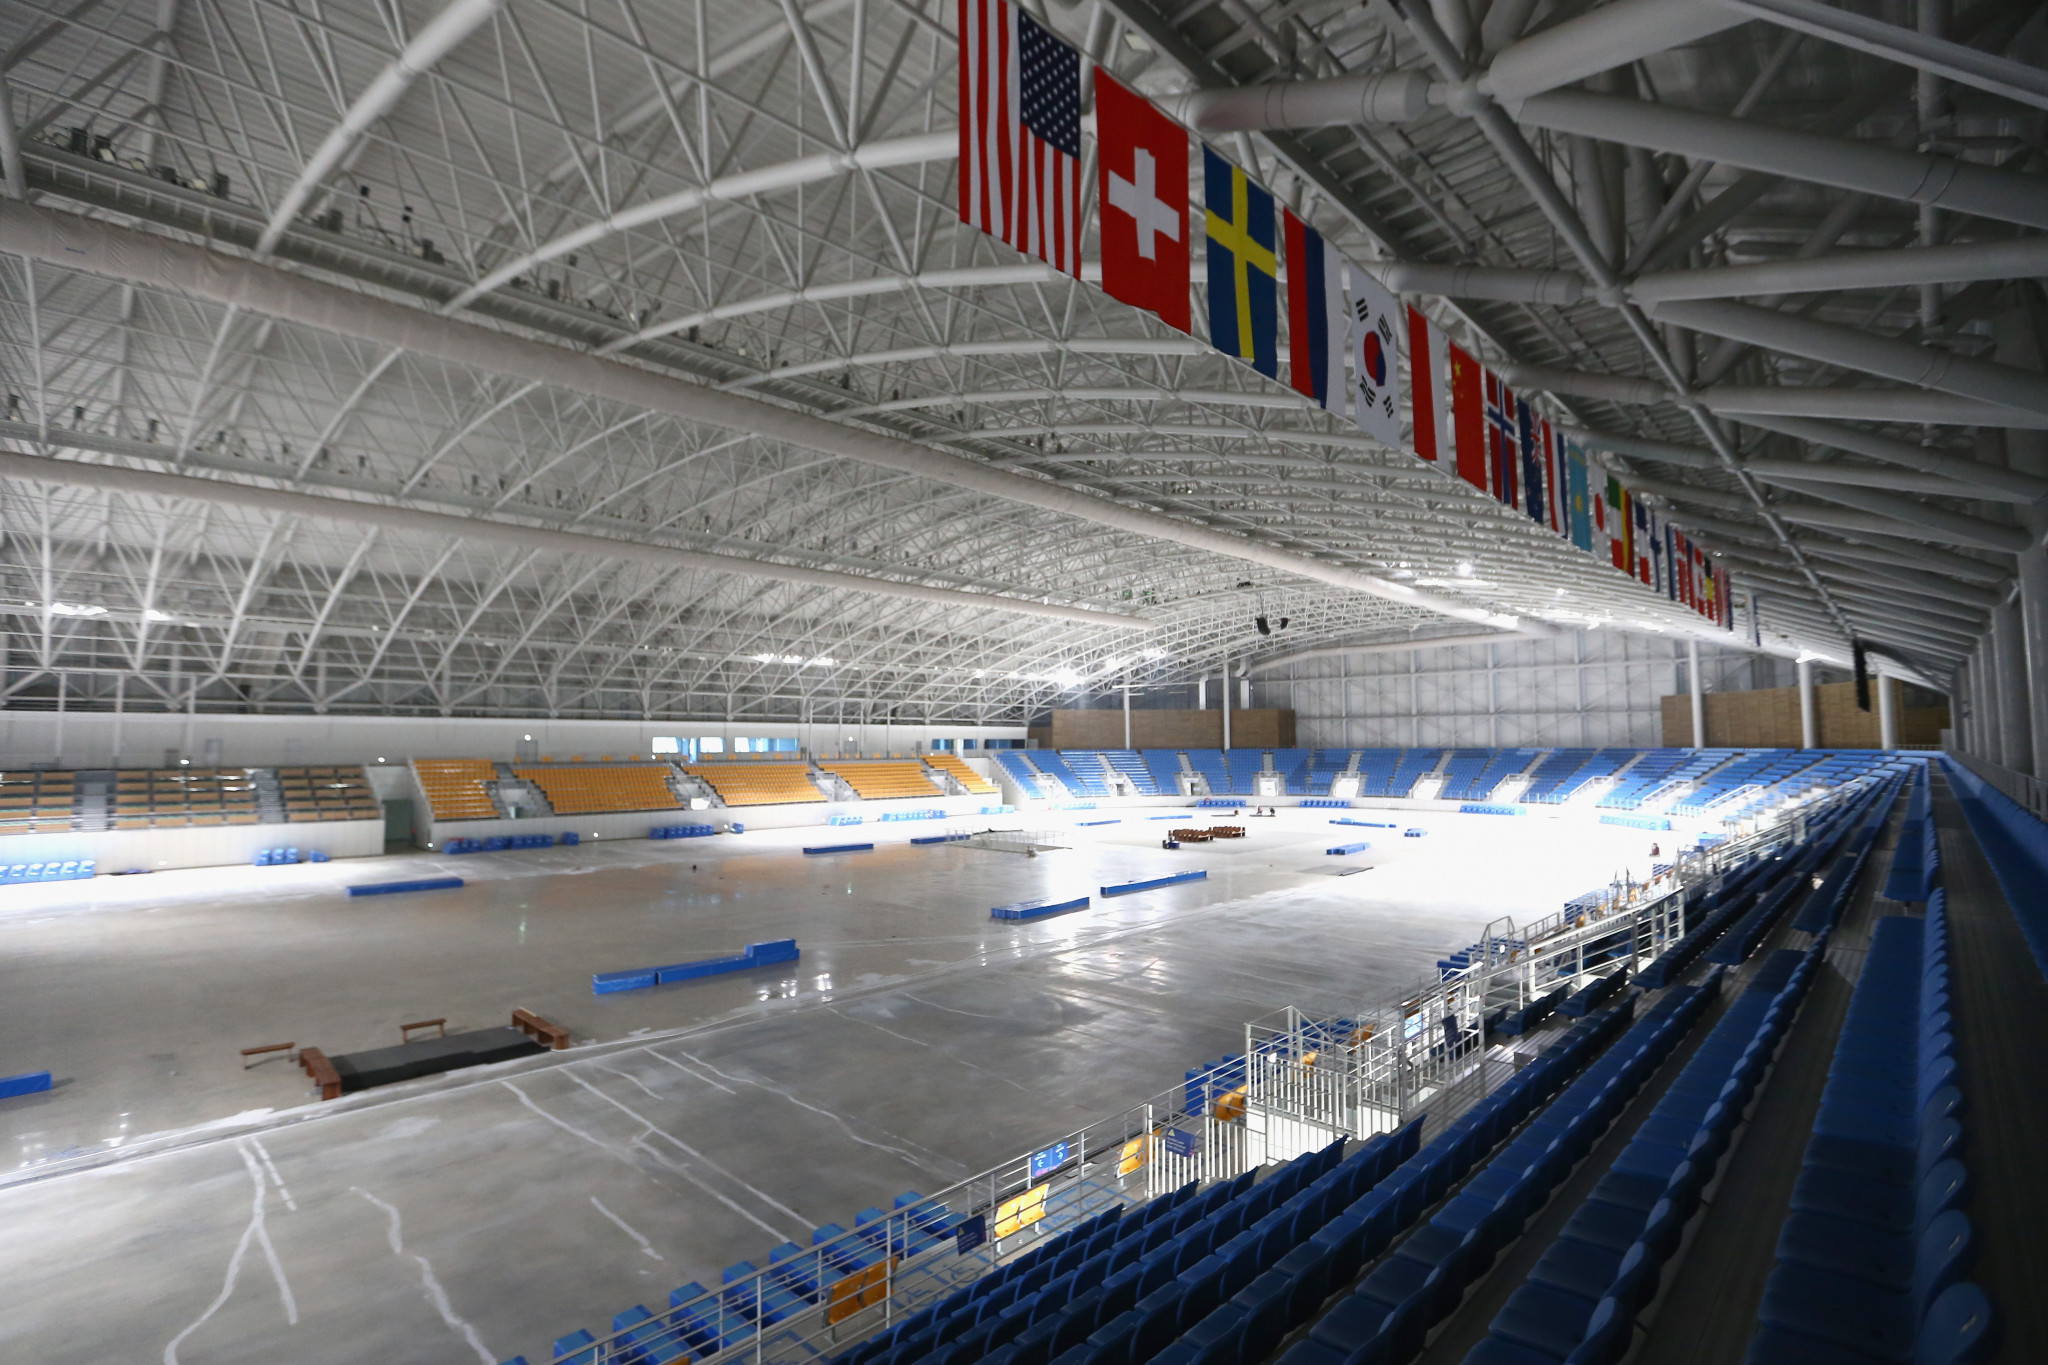 A record number of nations are set to participate in speed skating at Pyeongchang 2018 ©Getty Images